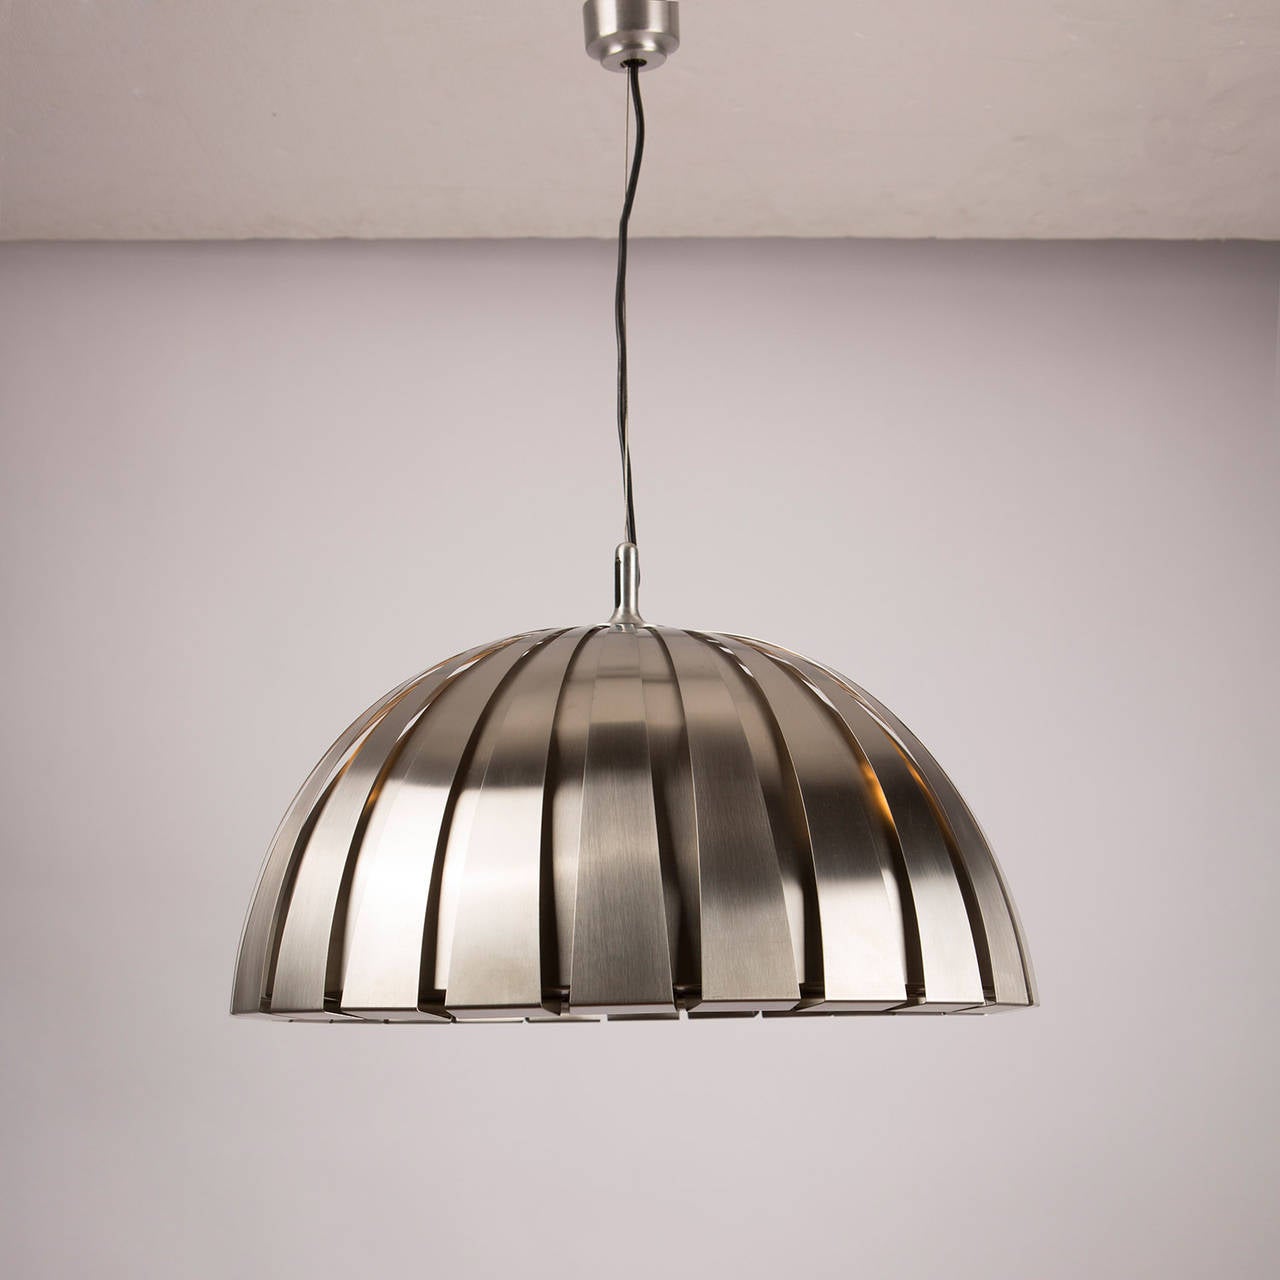 Set of Two Steel Ceiling Lamps by Elio Martinelli for Martinelli, Italy, 1960s For Sale 1